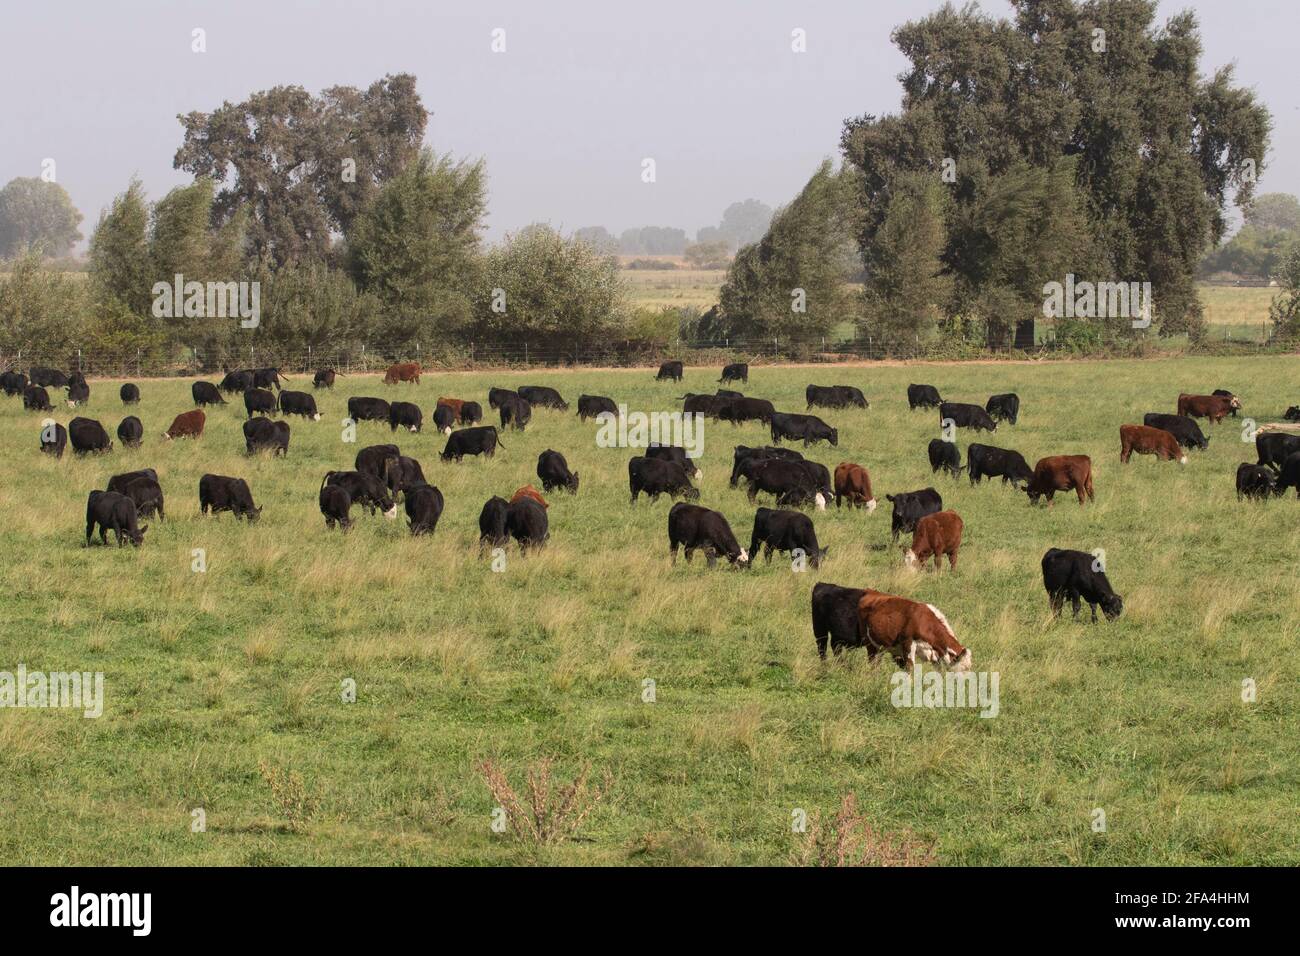 Grass-fed Cattle Herd, Angus, Hereford, beef cattle, private ranch, irrigated pasture, San Joaquin Valley, Stanislaus County, California Stock Photo